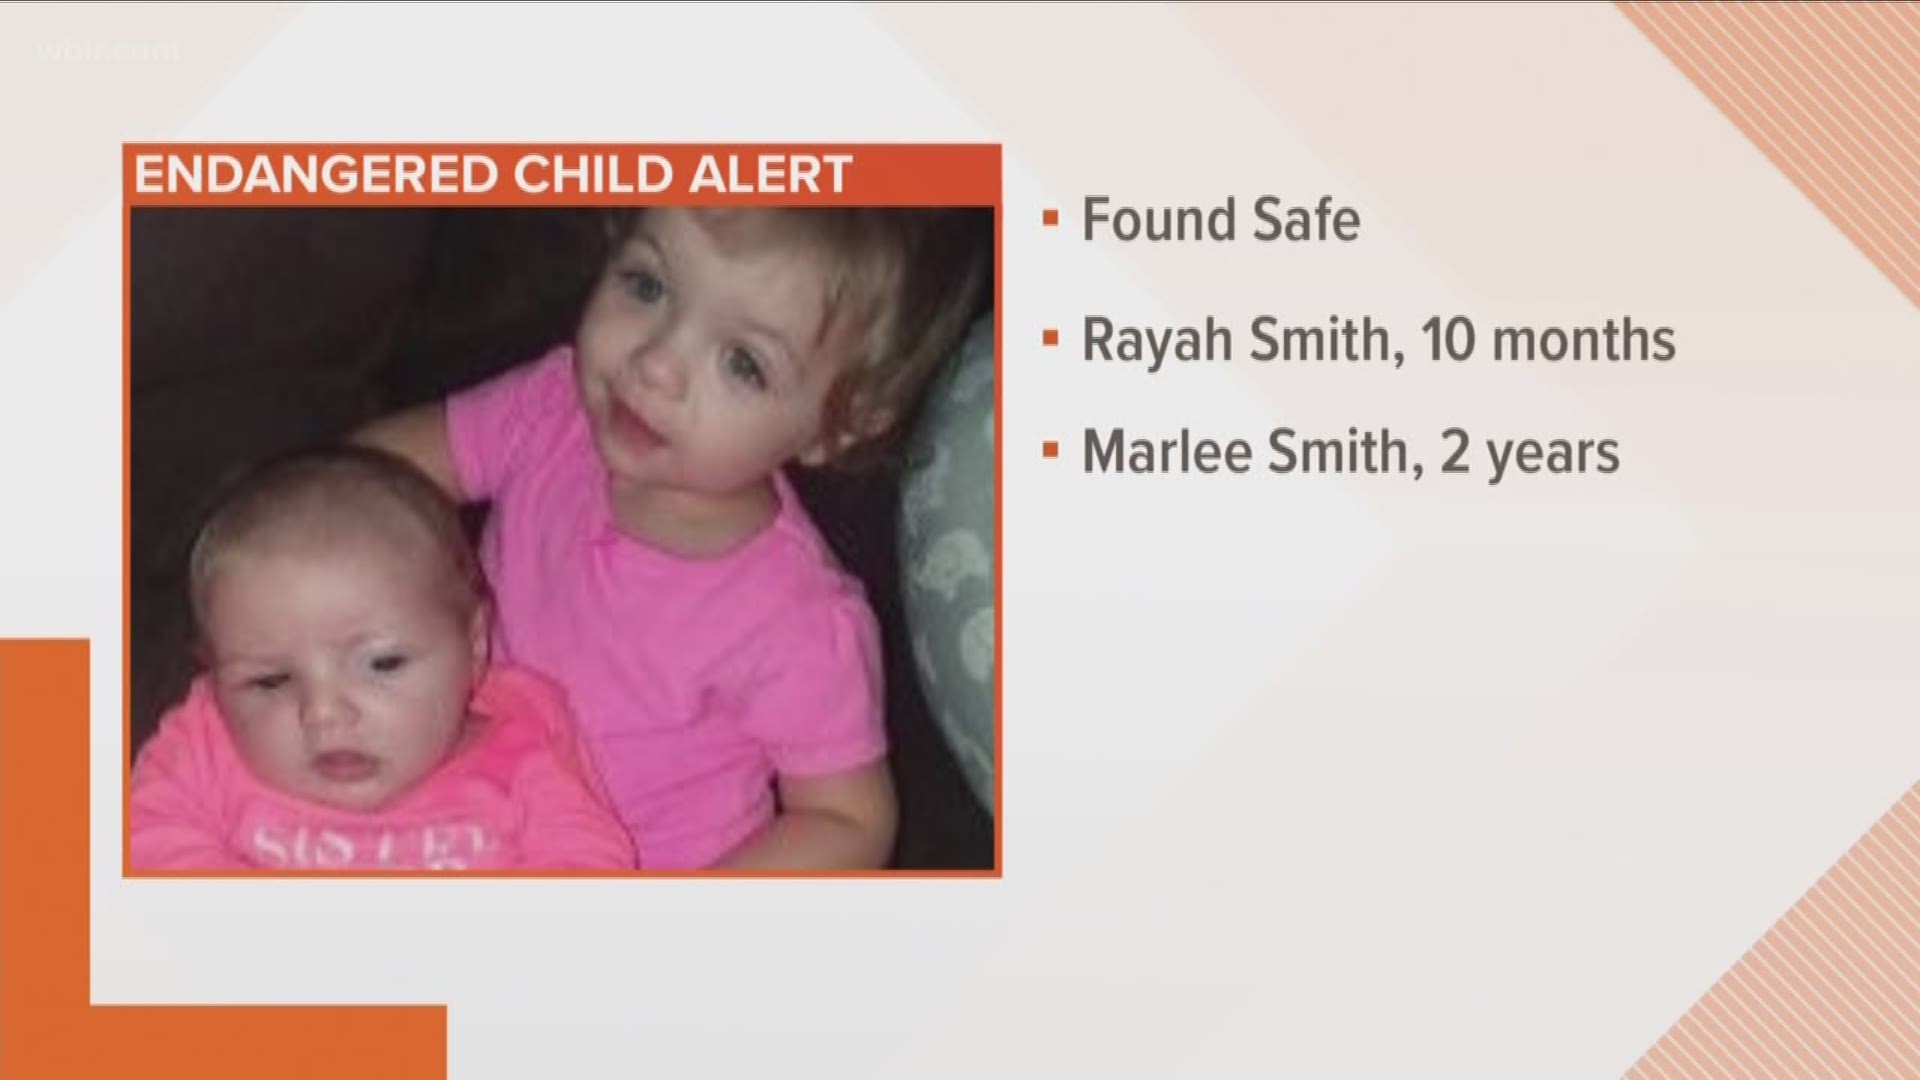 The search for two missing children in cookeville is over. The TBI says the young girls -- subject of an endangered child alert -- have been found safe. They'd been last seen June 7th.